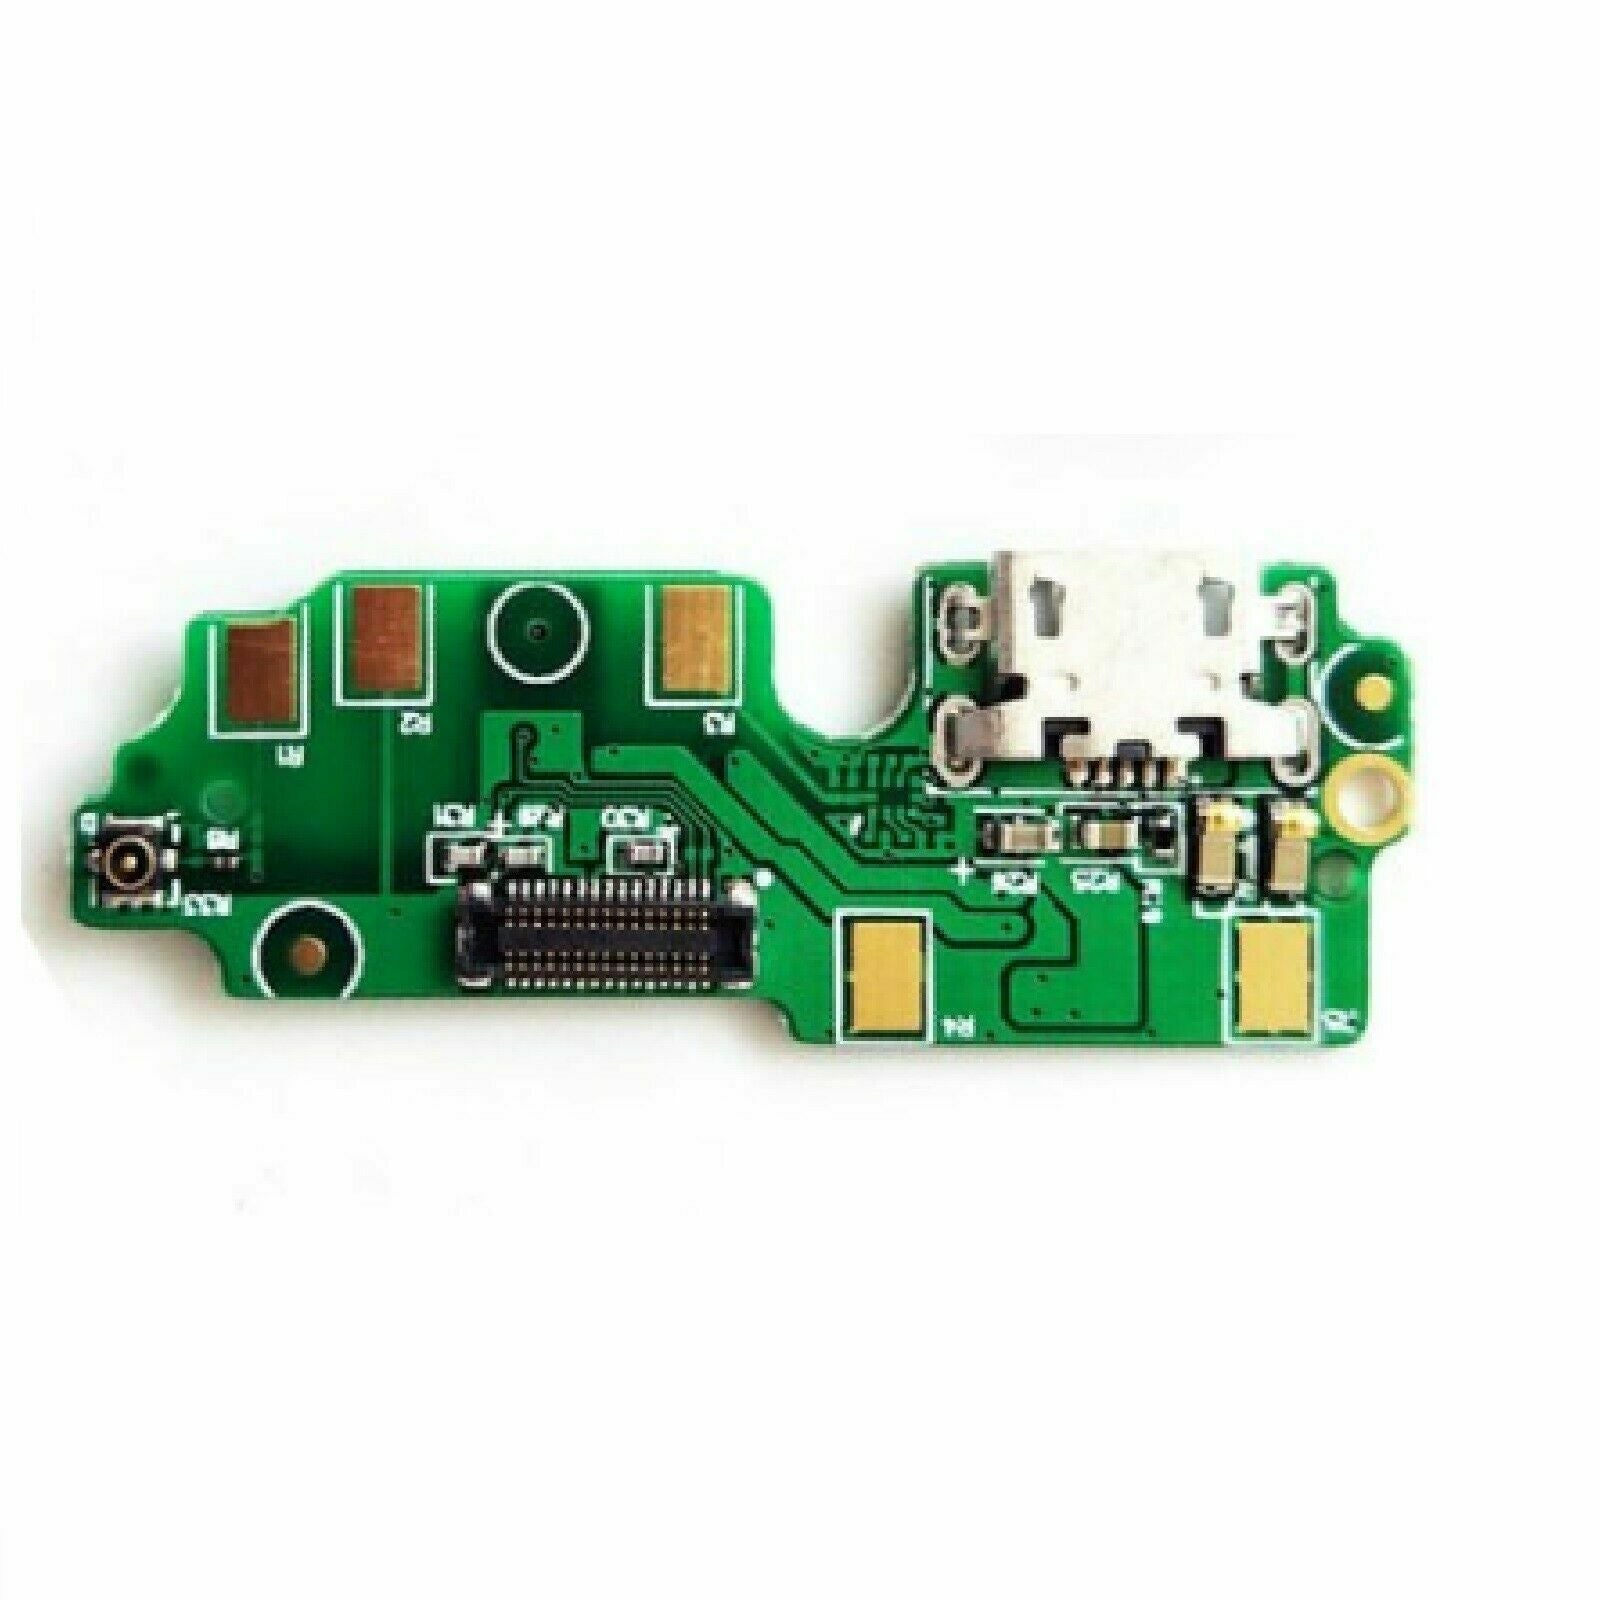 Xiaomi Redmi 4 Pro Micro USB Charging Port Board With Mic for [product_price] - First Help Tech